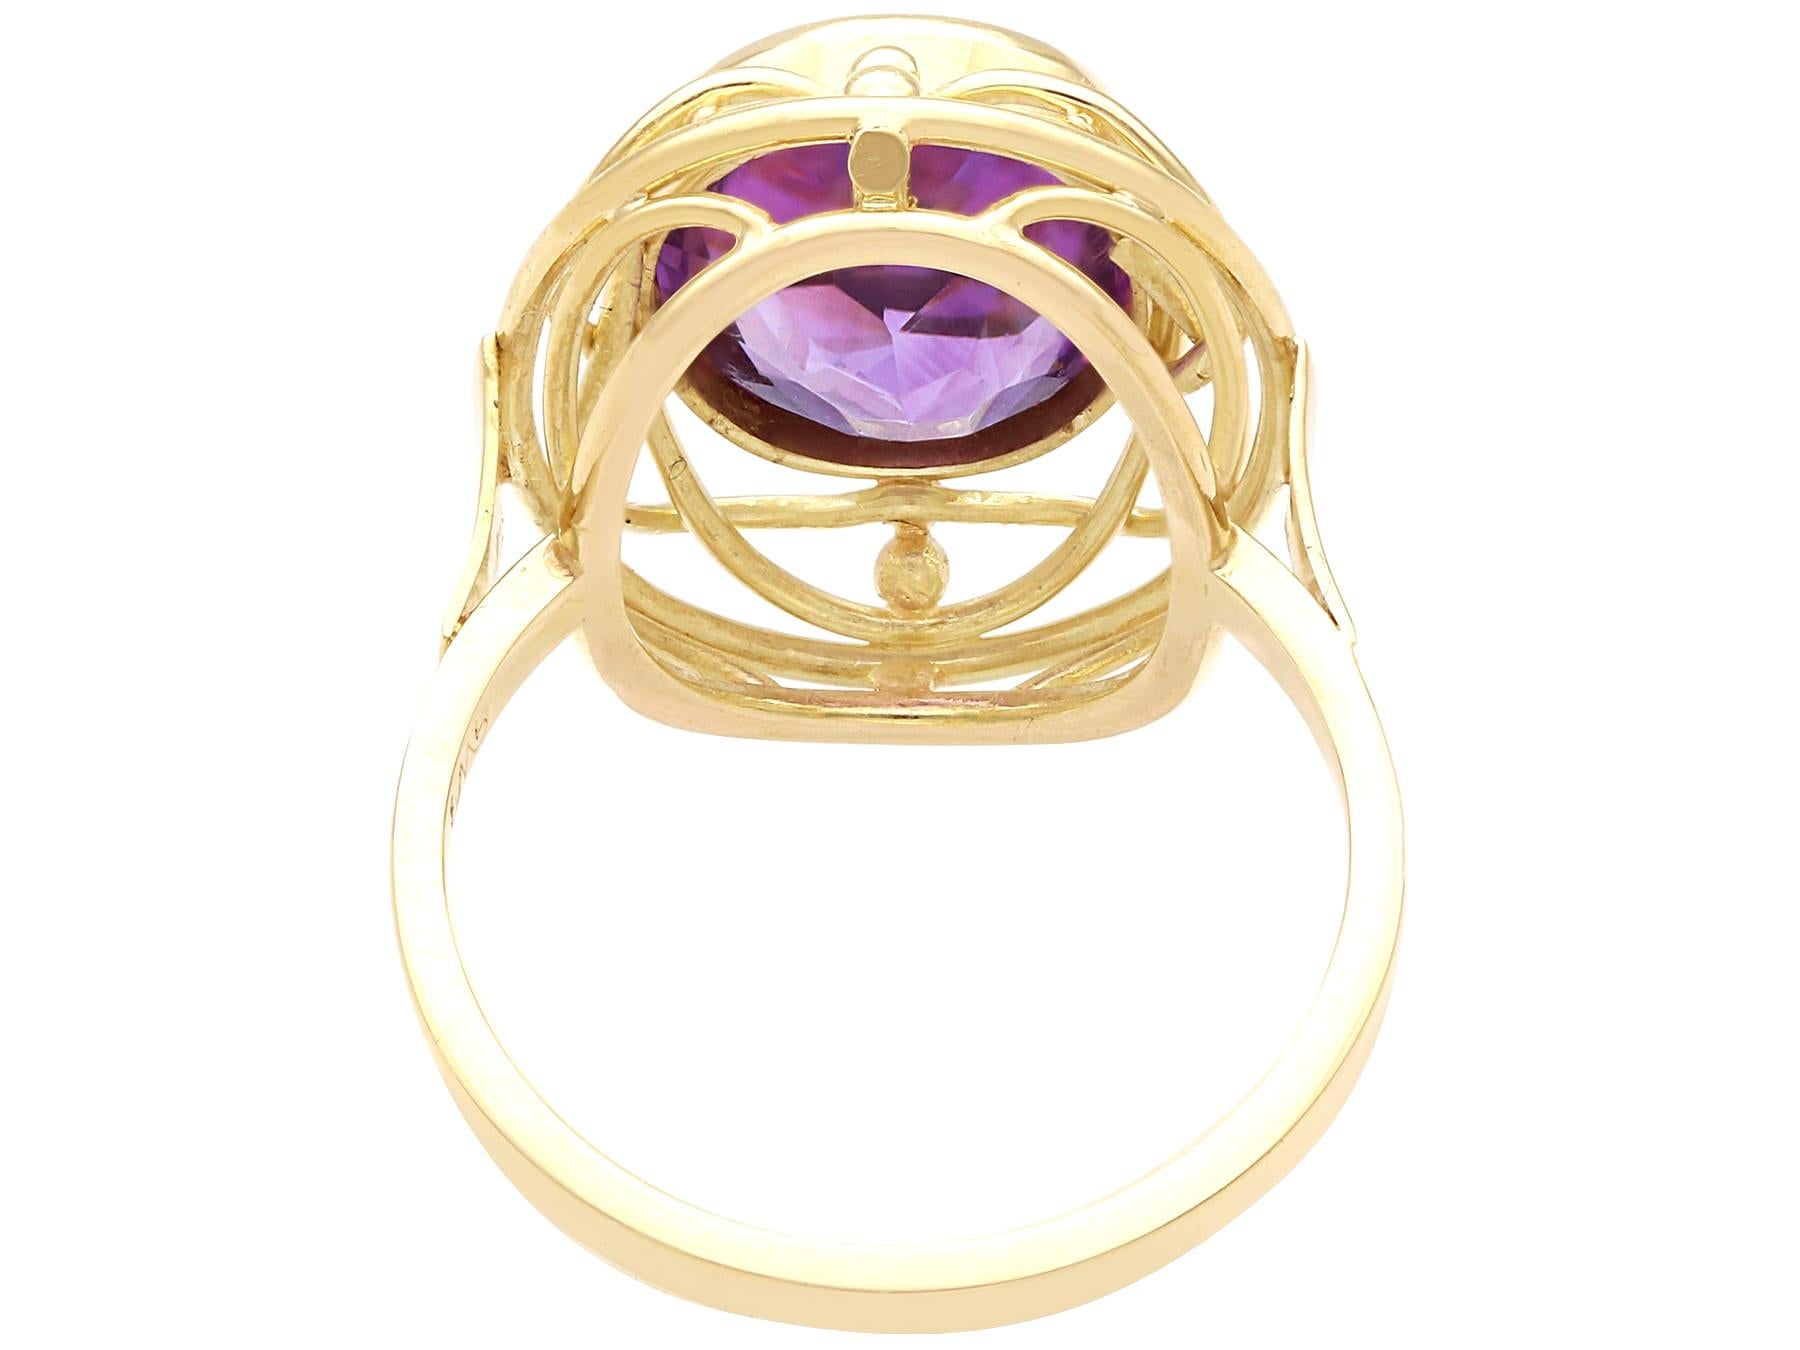 Vintage 6.91Ct Amethyst and 14k Yellow Gold Dress Ring 1940 For Sale 2